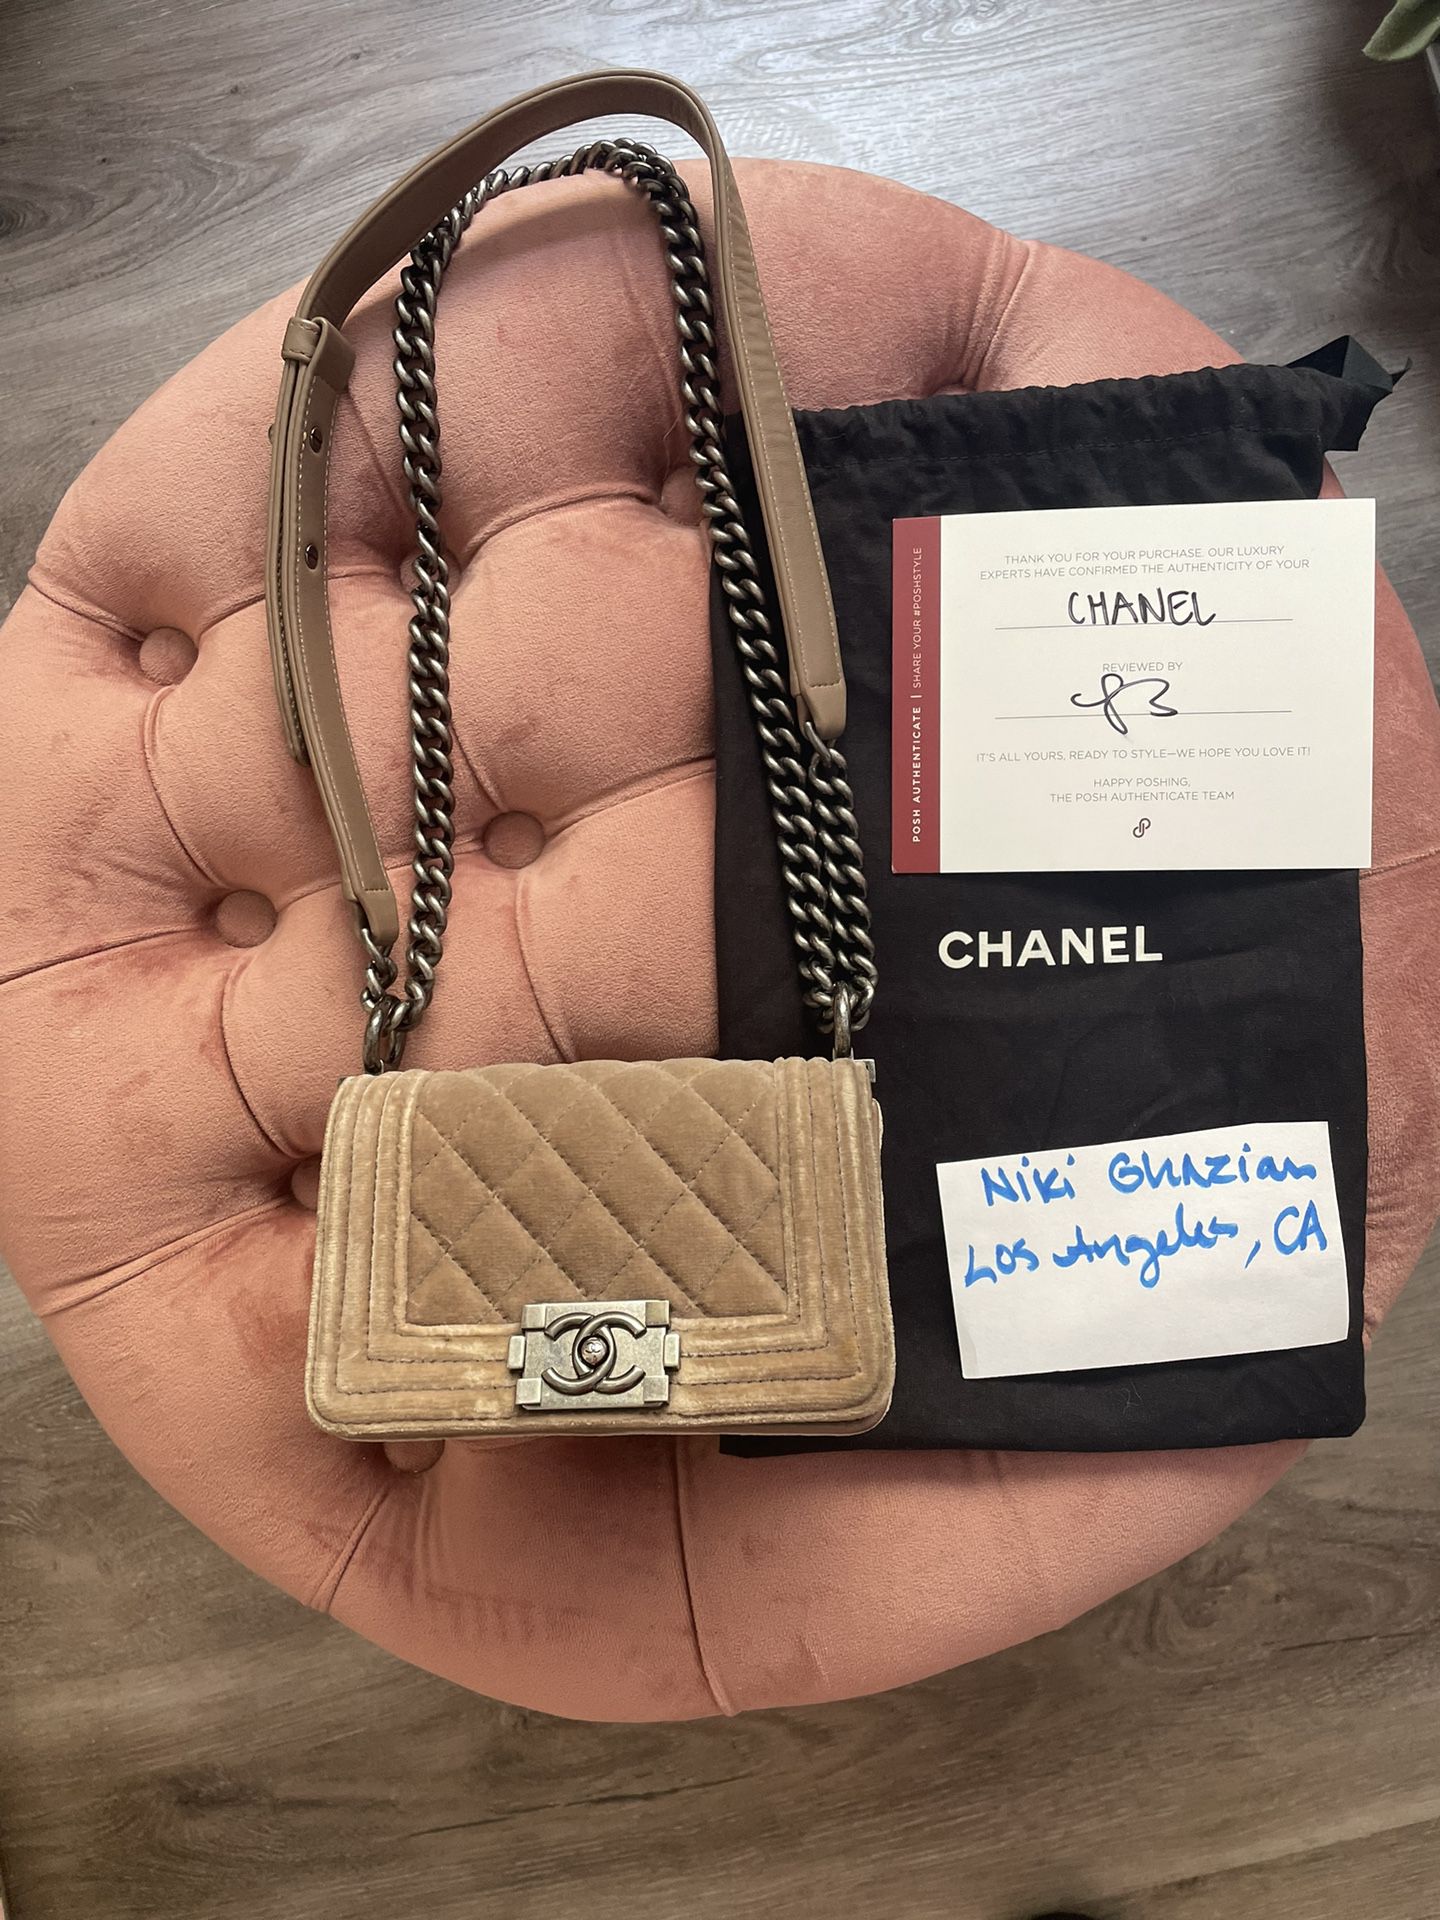 AUTHENTIC Chanel Boy Bag! Excellent Pre-Owned Condition